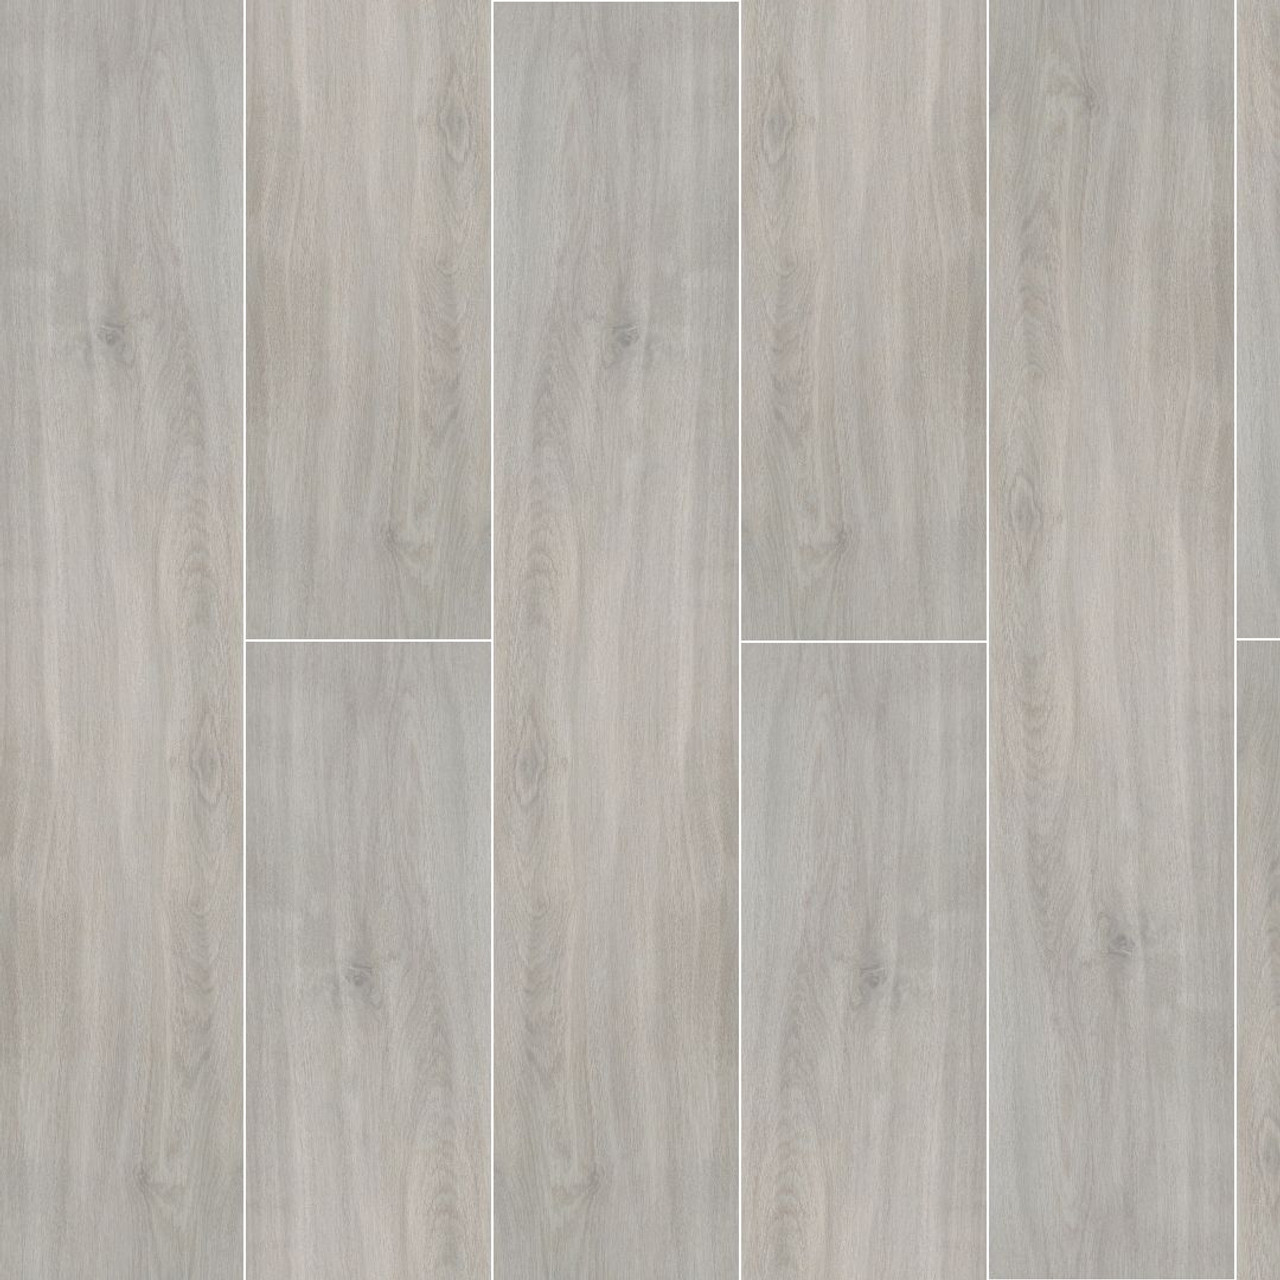 Practical and Cost-Effective Wood Look Tiles for Flooring